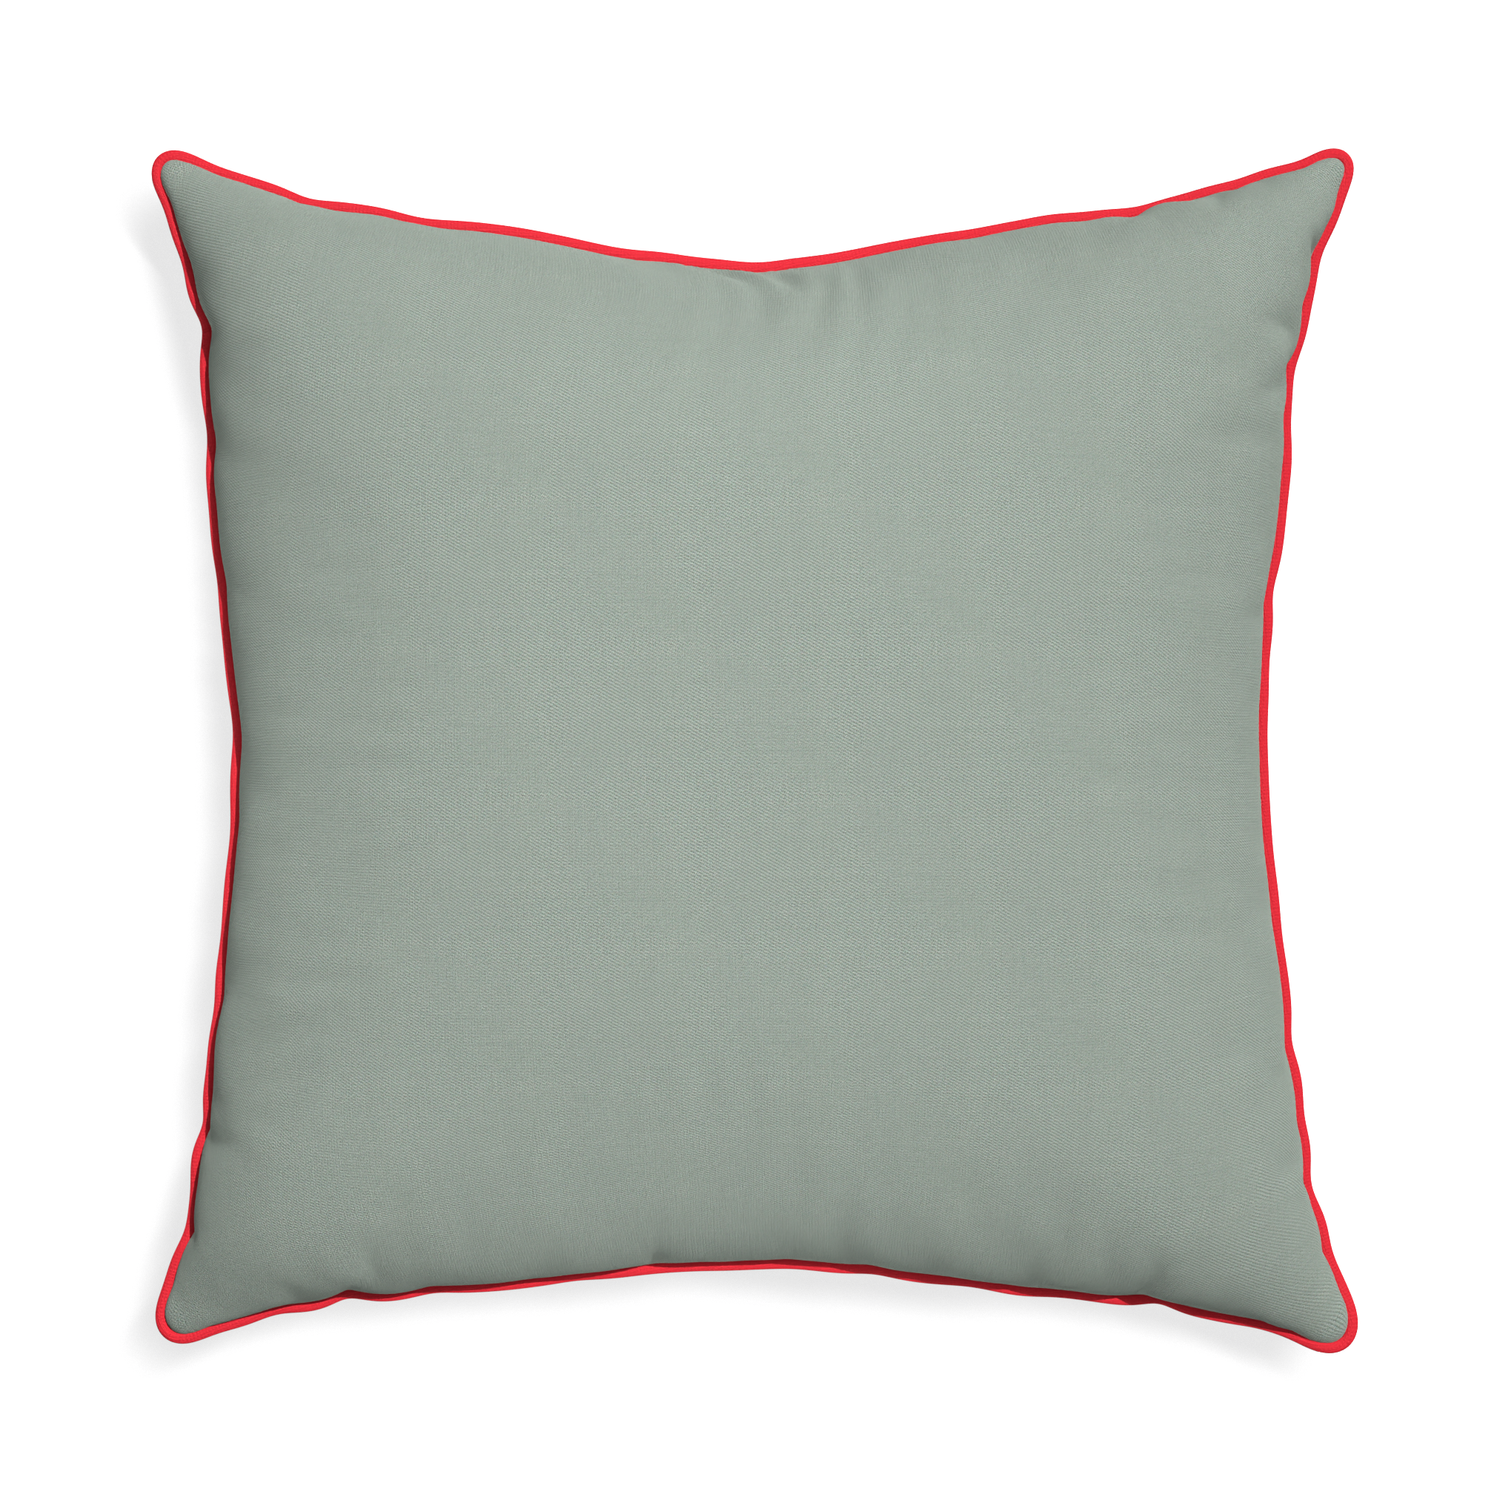 Euro-sham sage custom sage green cottonpillow with cherry piping on white background